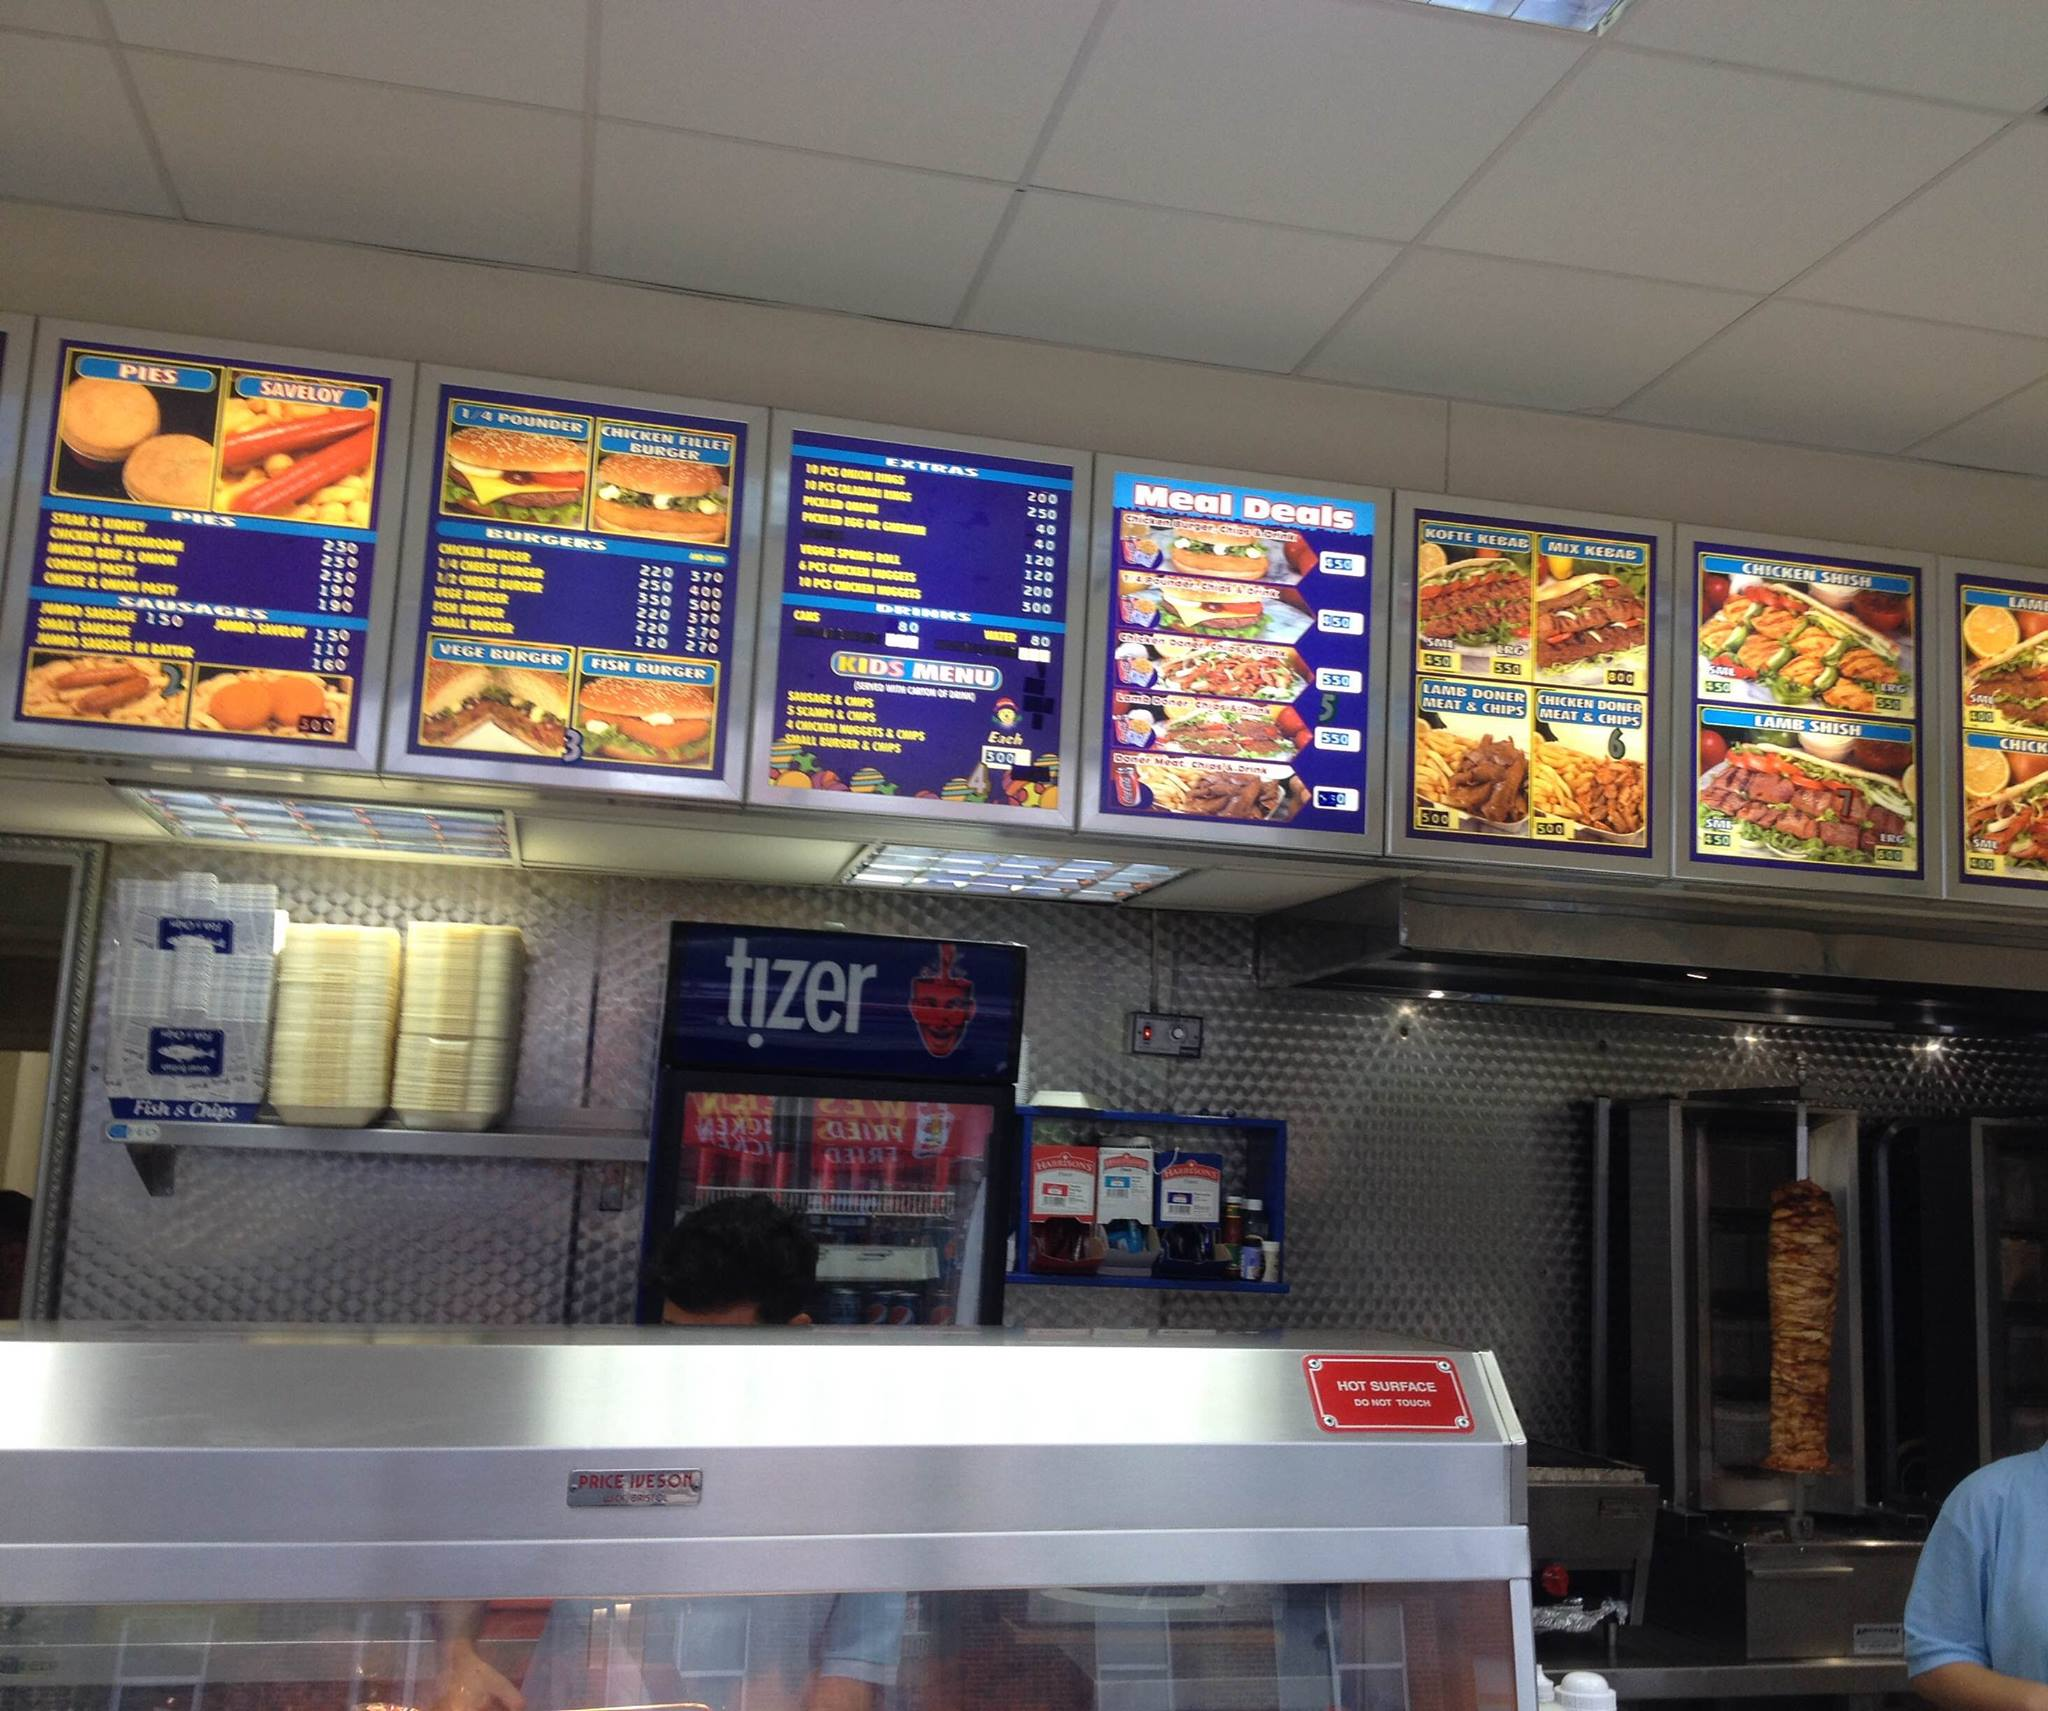 Mr Chippy Image gallery and photos - W7 3DA - Southall | View